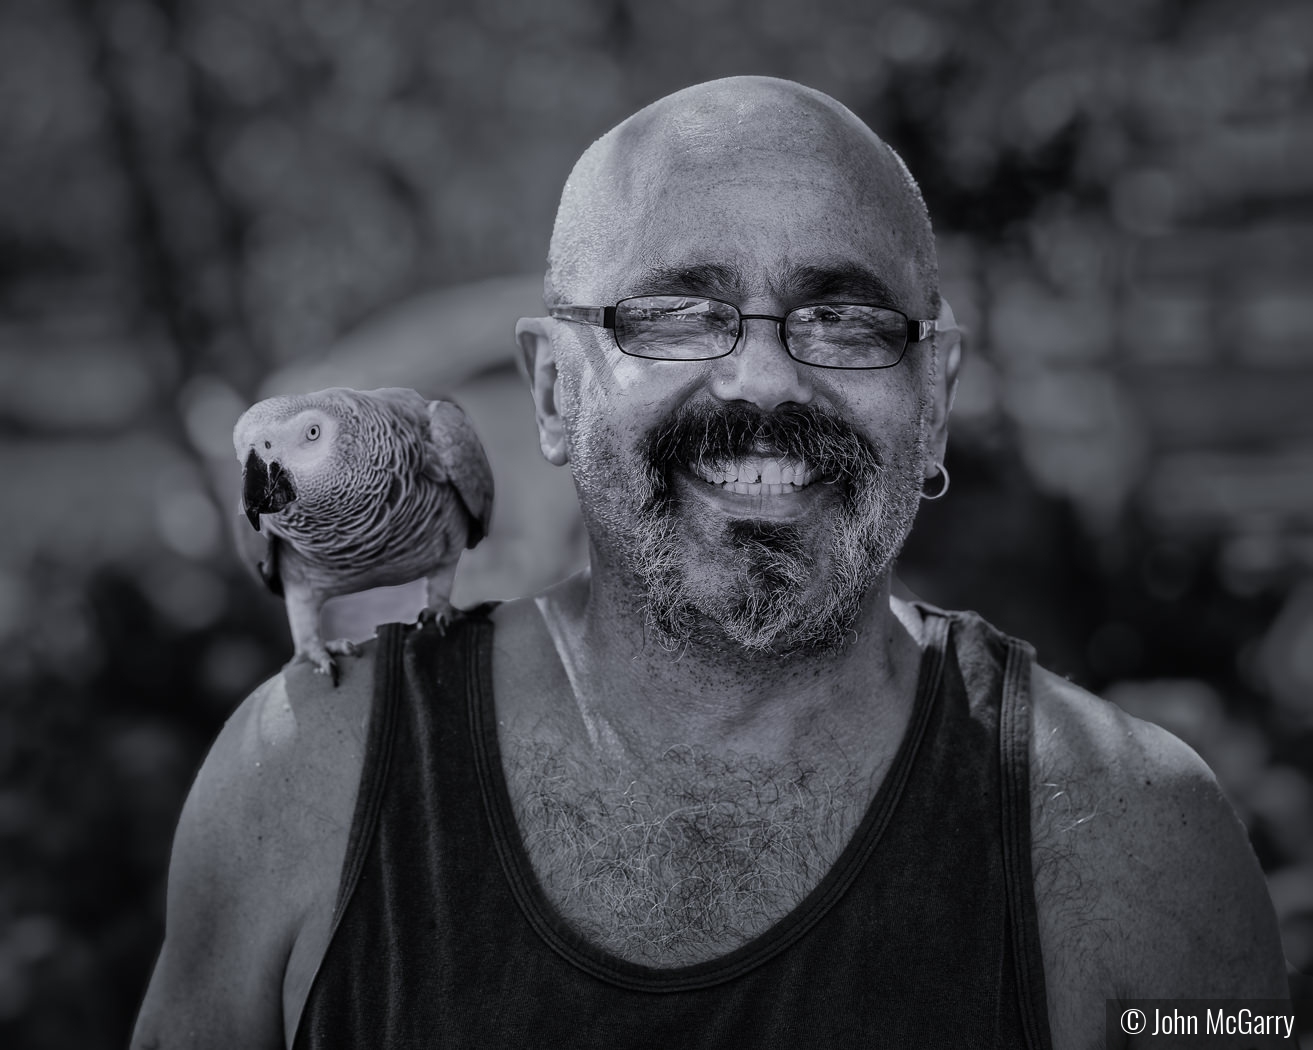 Man with Gray Parrot by John McGarry